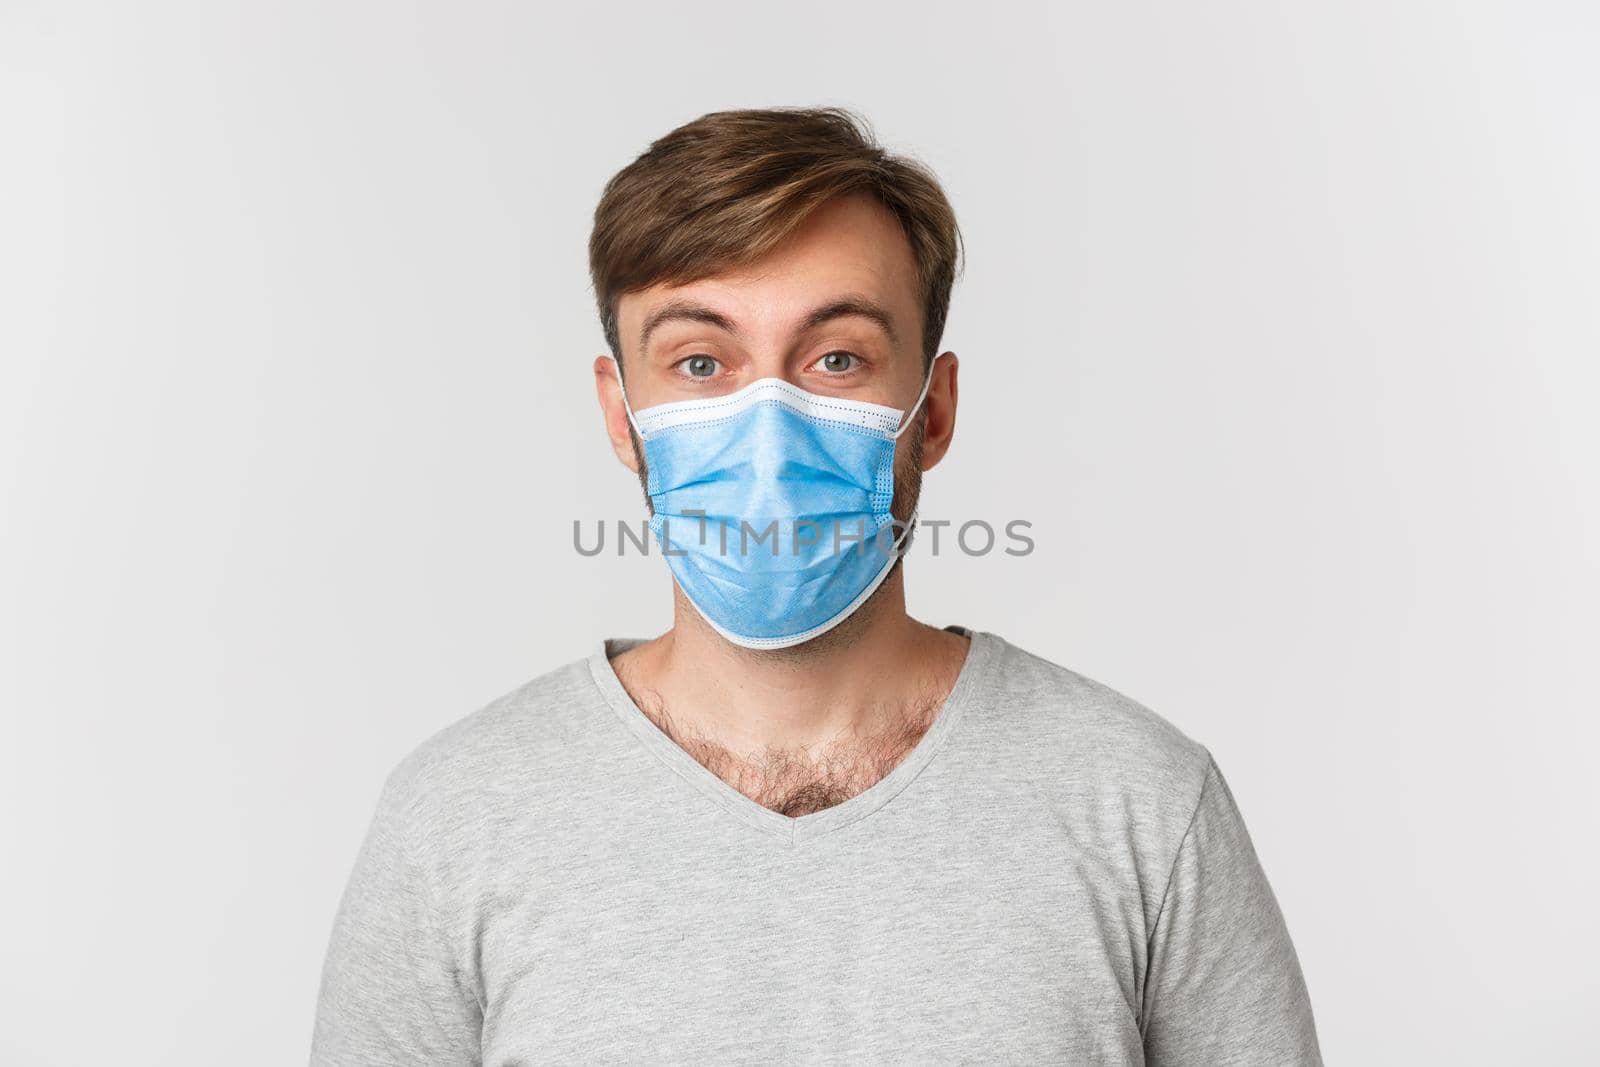 Concept of pandemic, covid-19 and social-distancing. Close-up of surprised man in medical mask, raising eyebrows amazed, standing over white background.